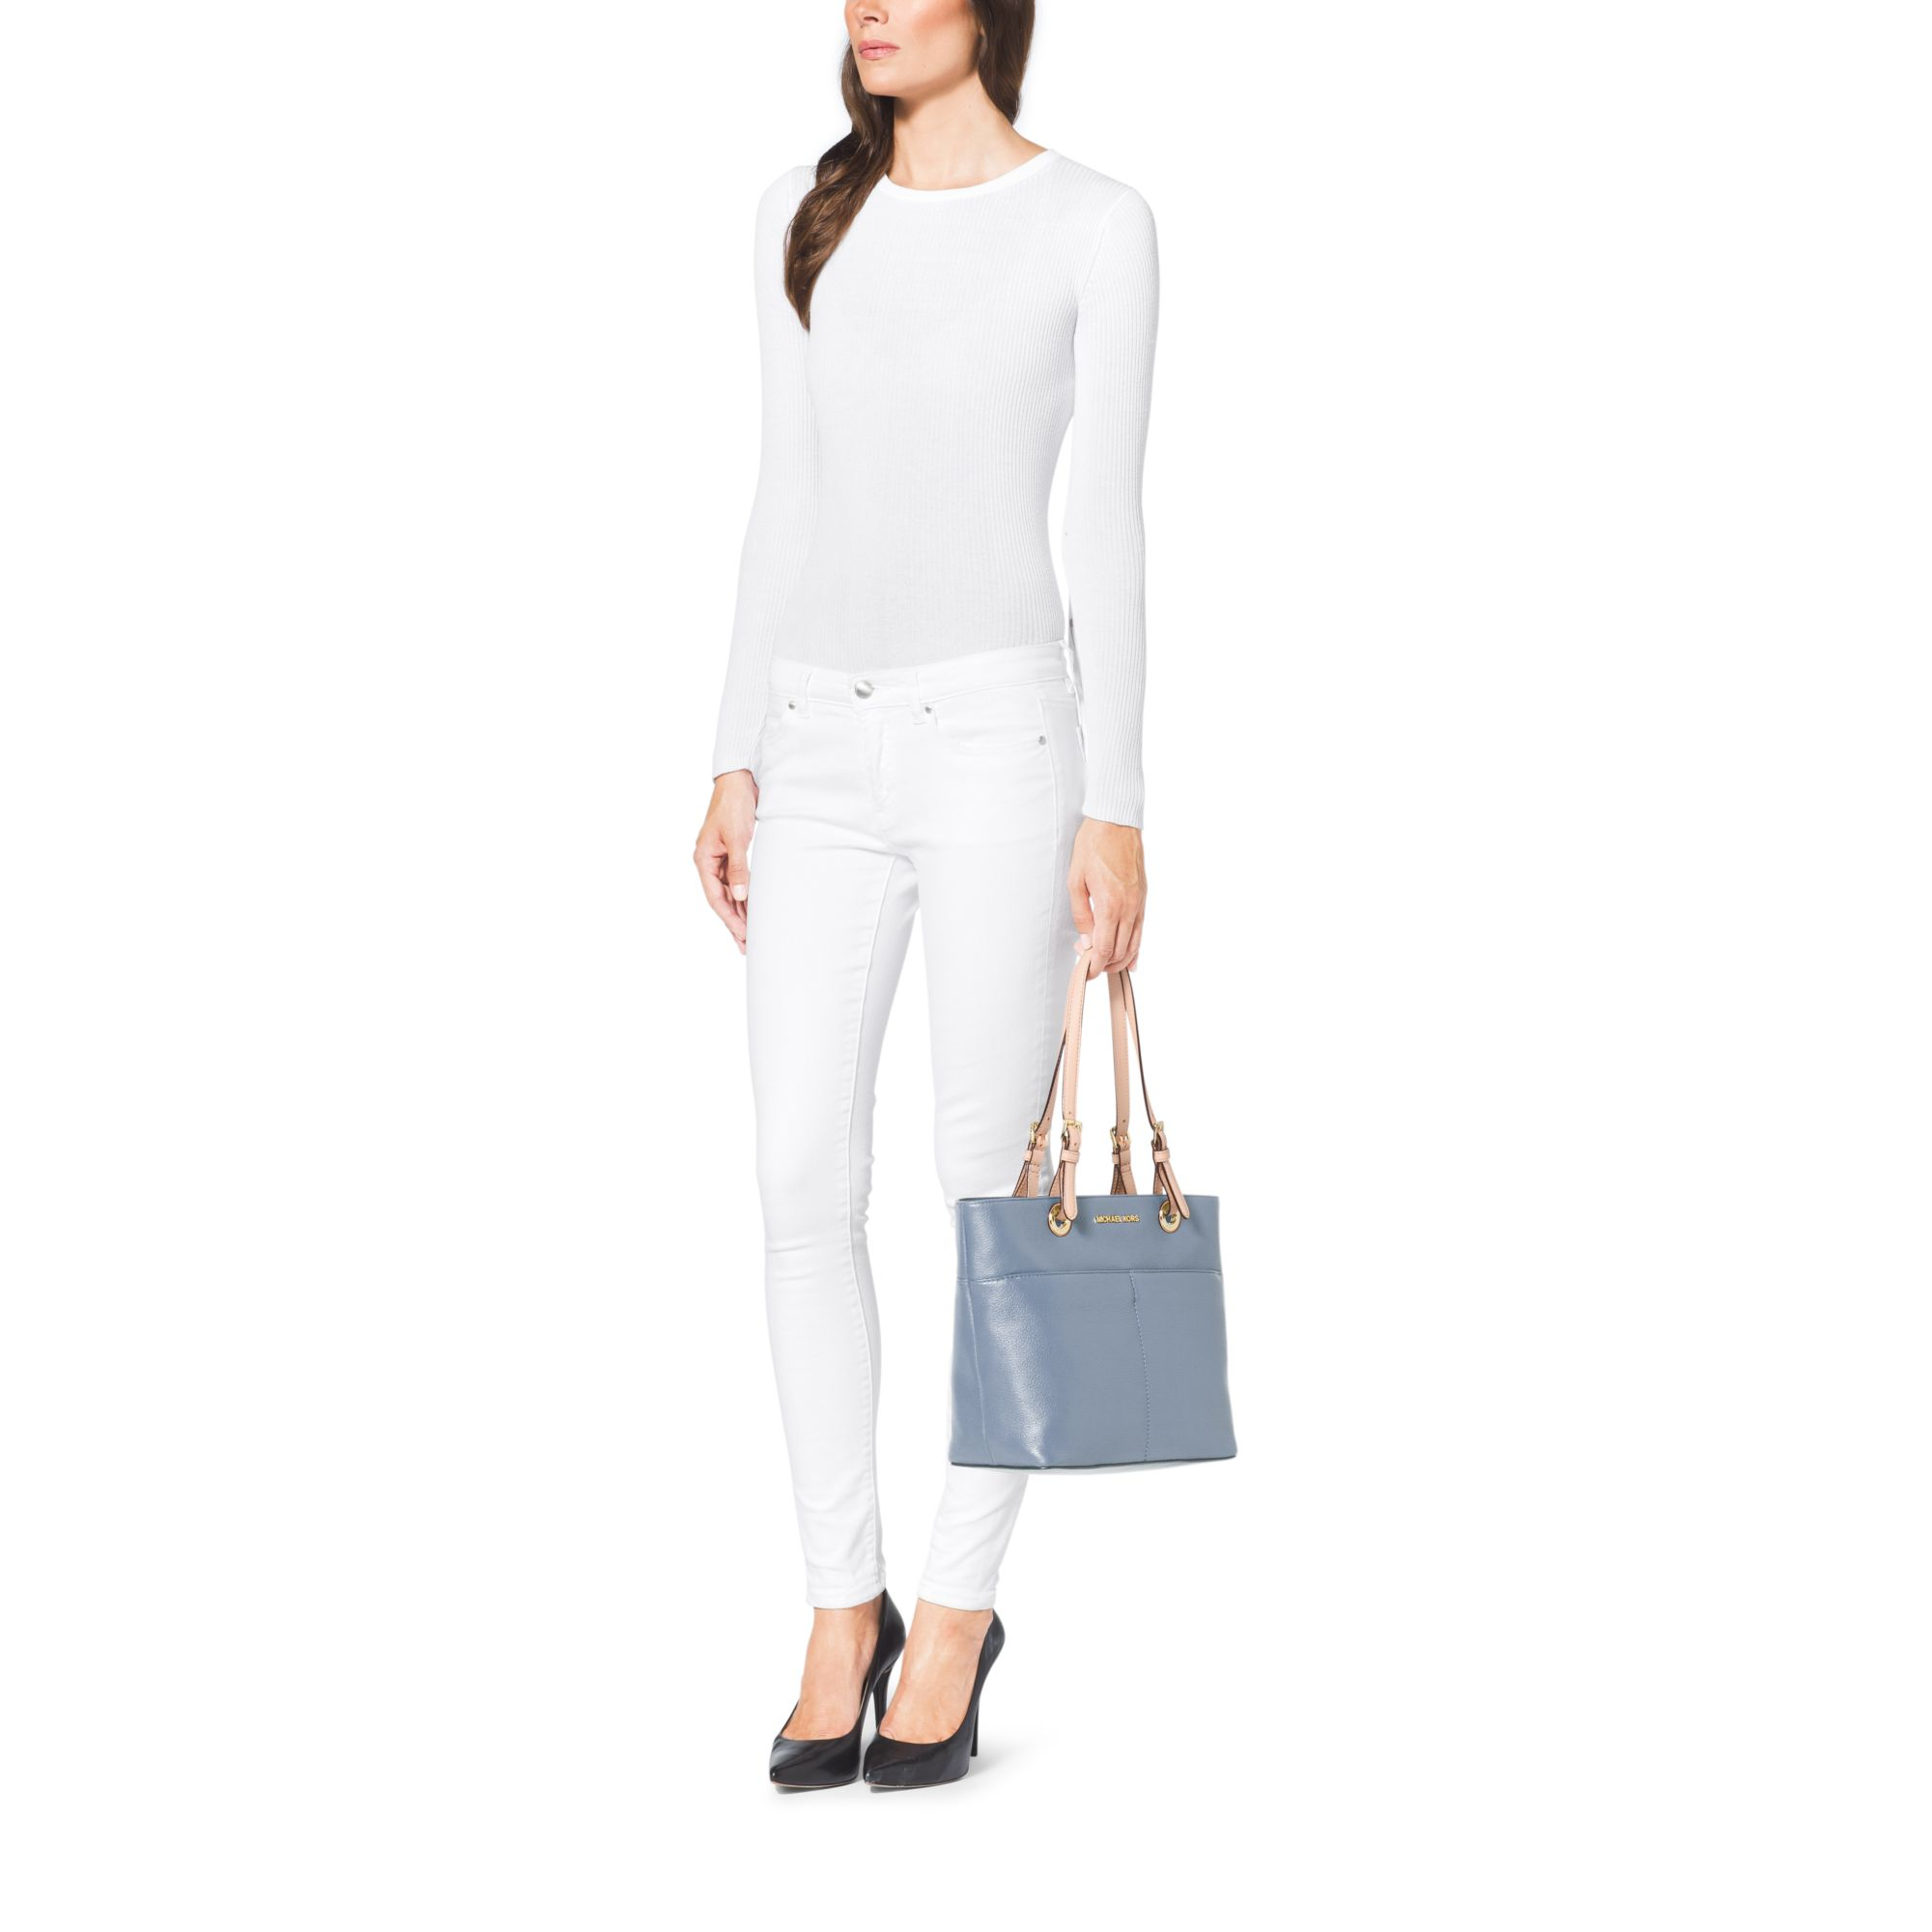 Michael Kors Bedford Leather Tote Bag in Pale Blue (Blue) | Lyst